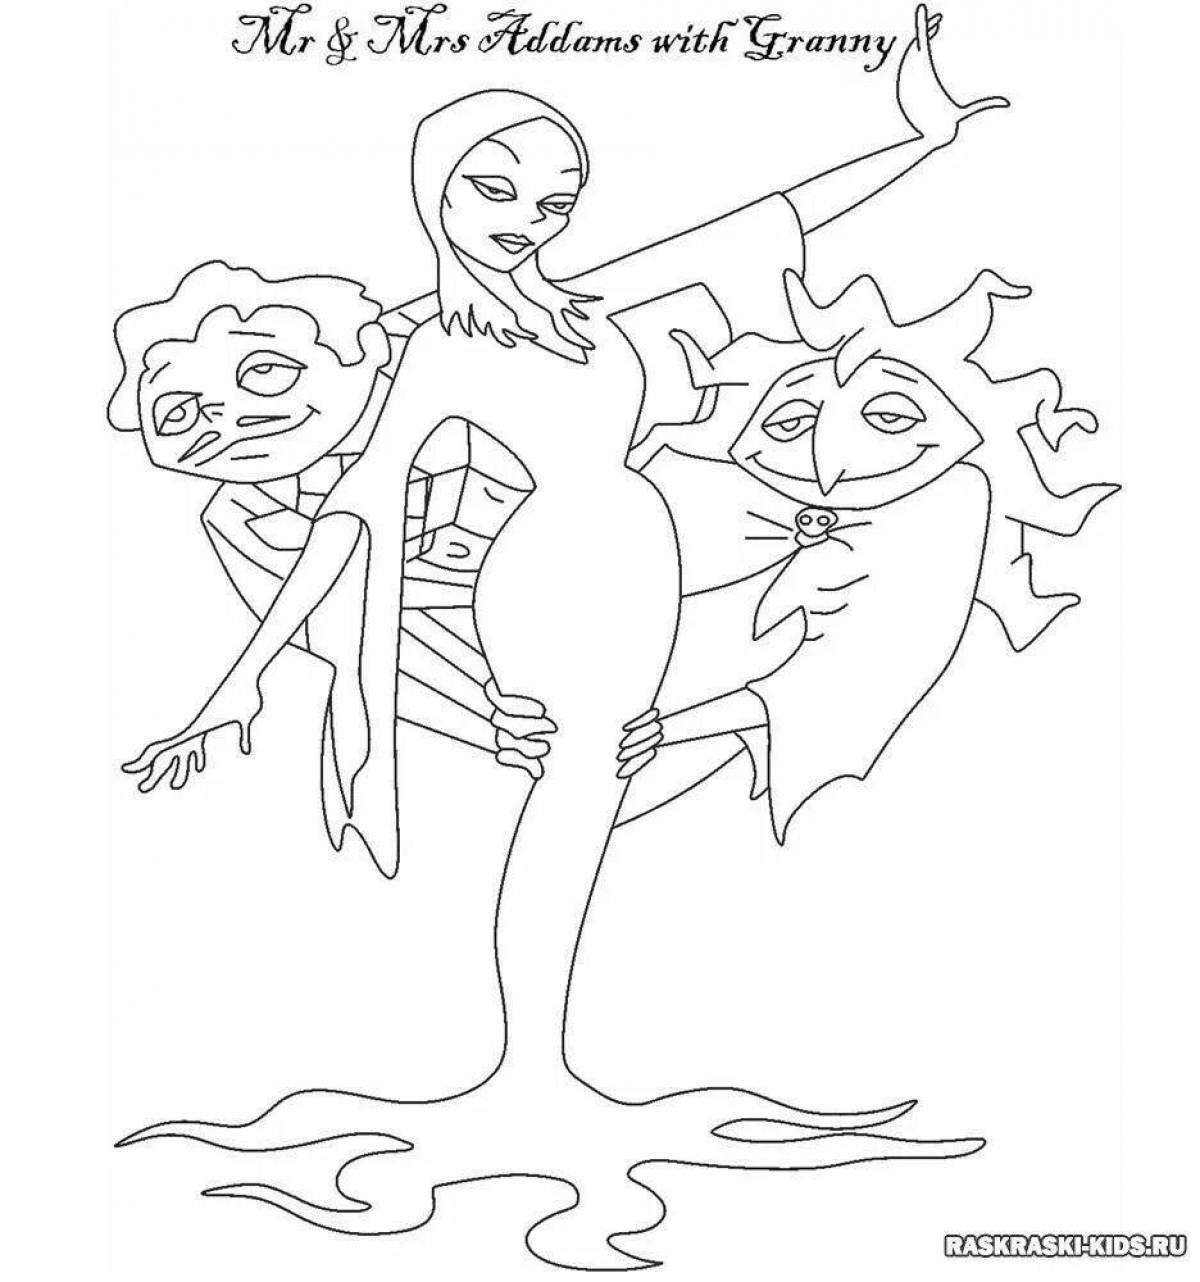 Playful addams coloring page